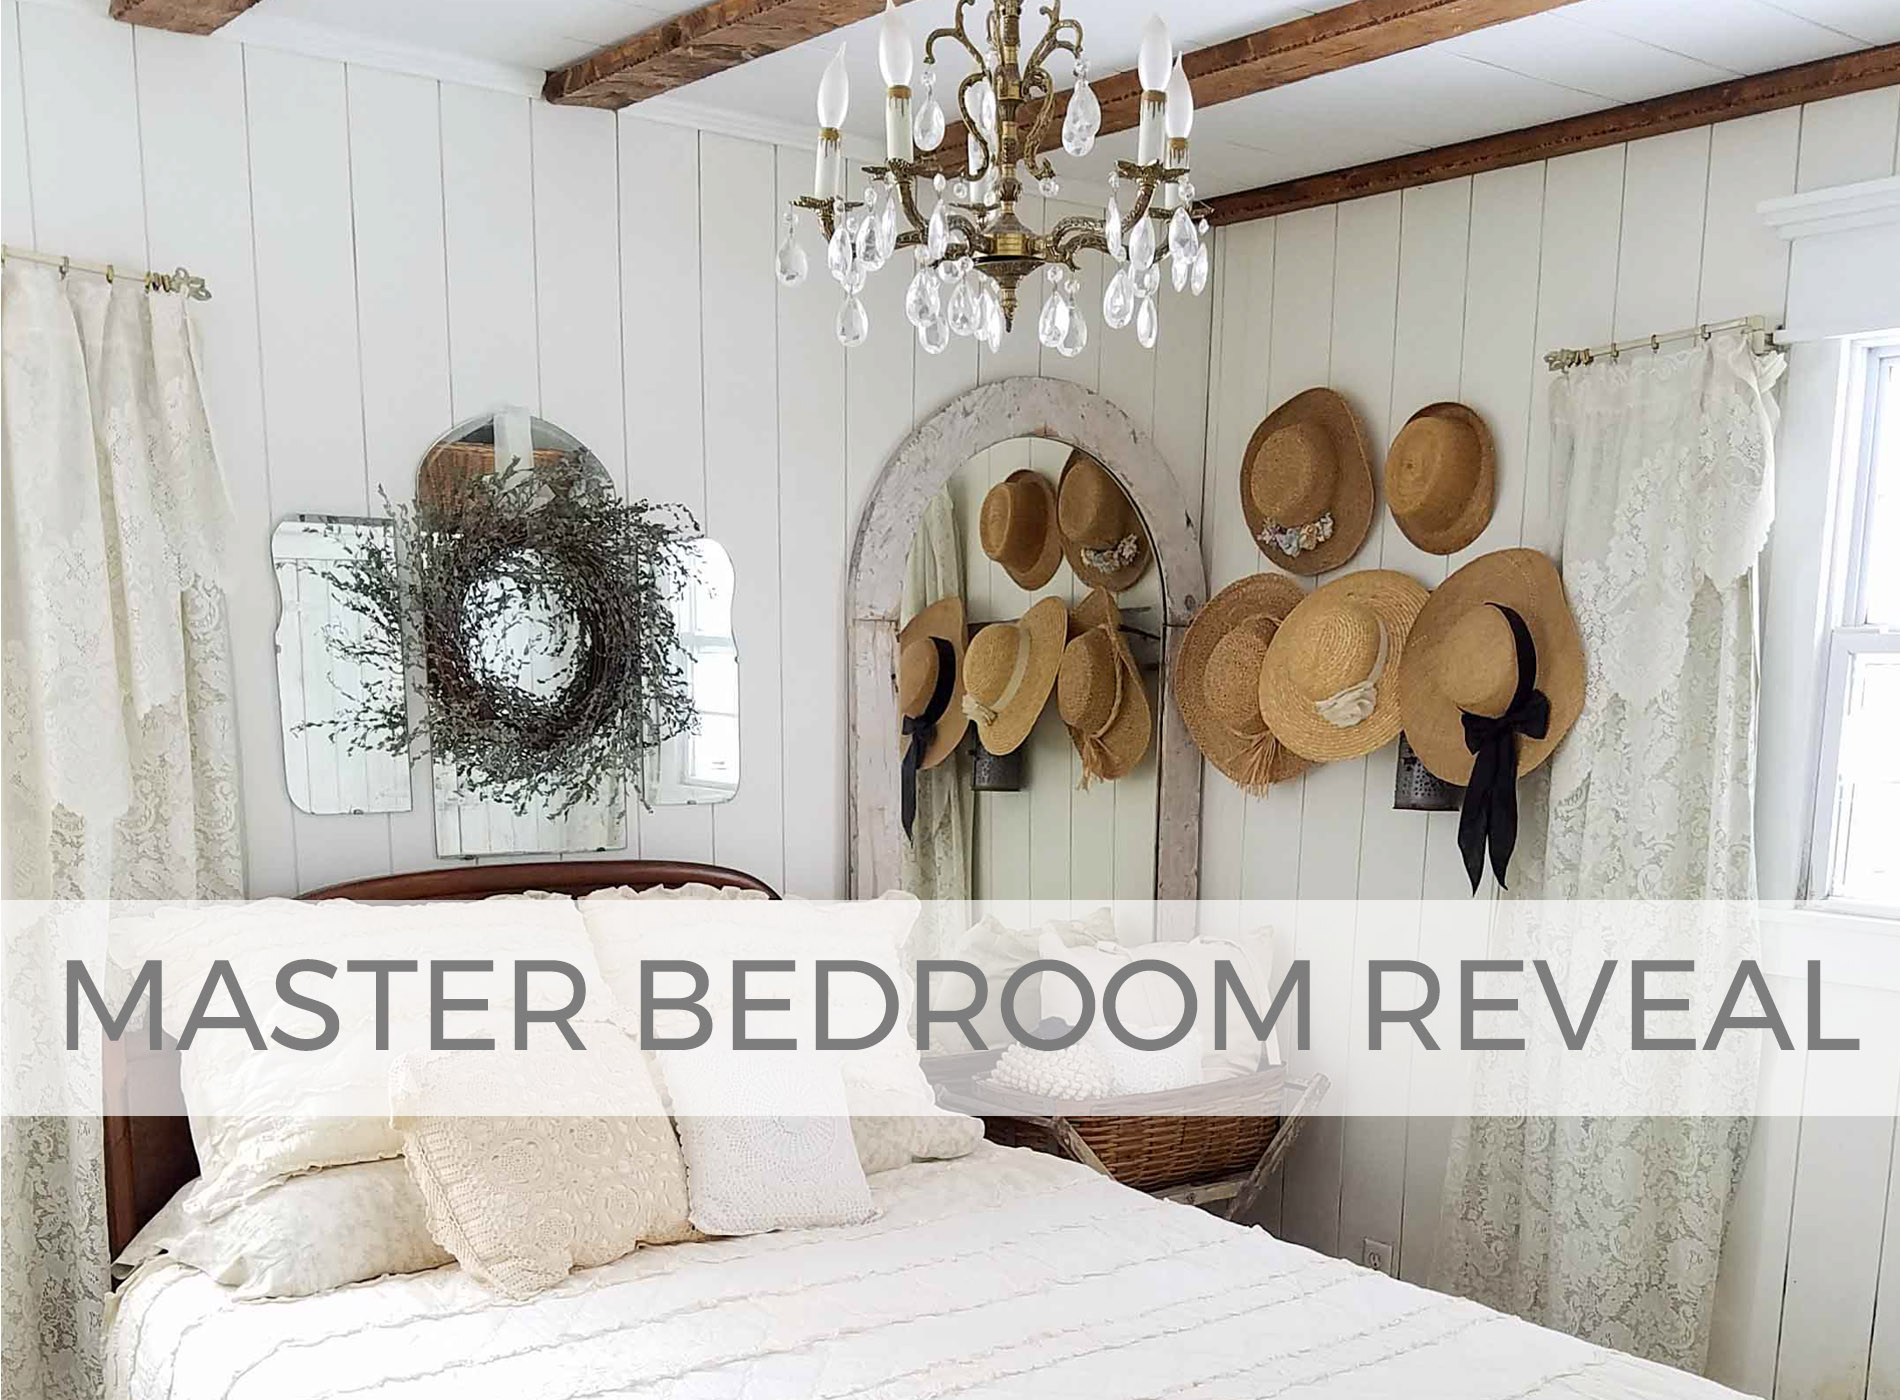 Our farmhouse master bedroom reveal by Larissa of Prodigal Pieces | prodigalpieces.com